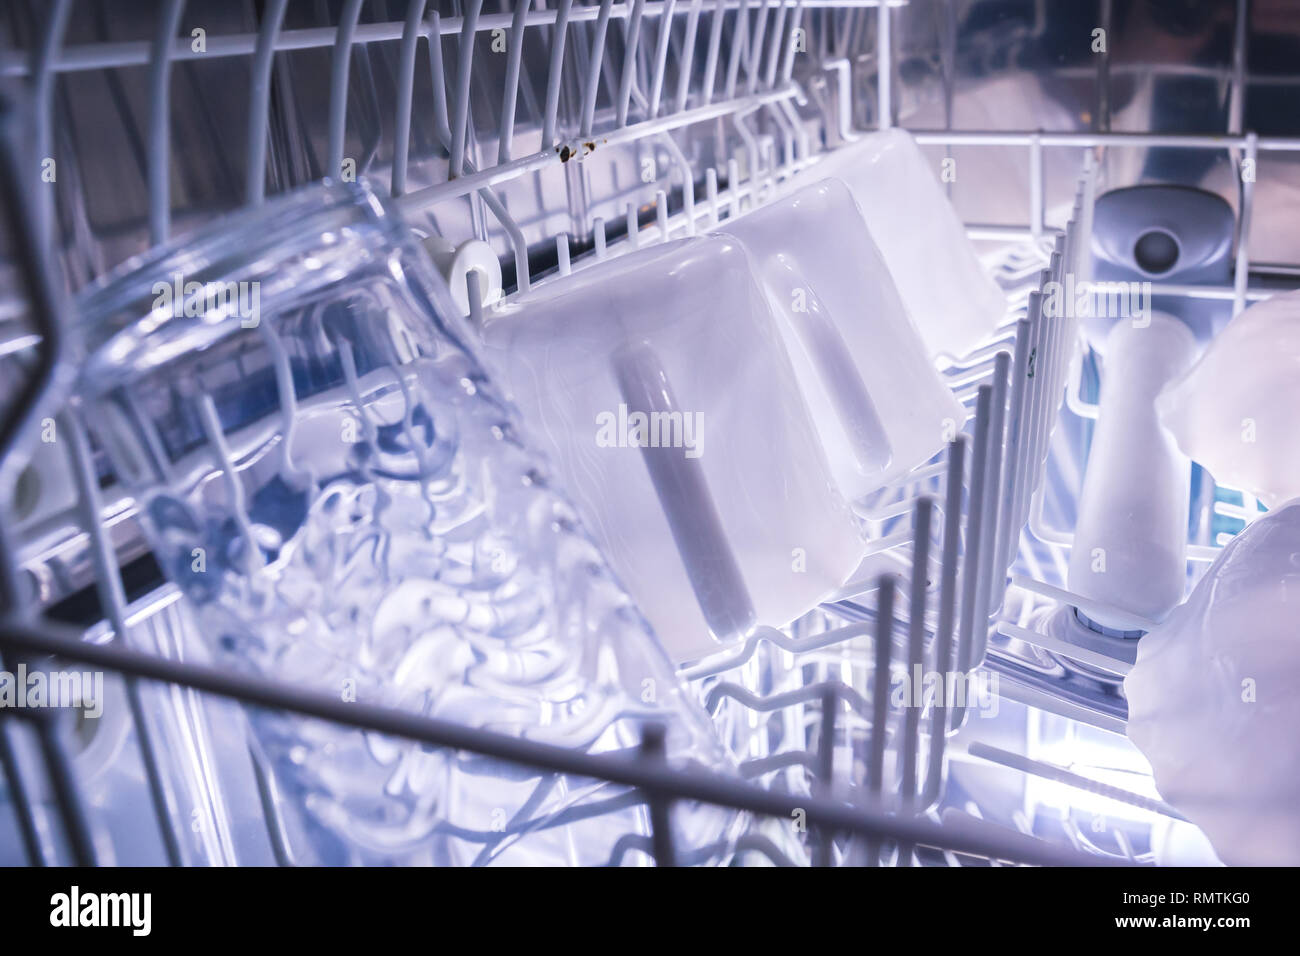 Dishes In The Open Dishwasher Inside Clean Dishware